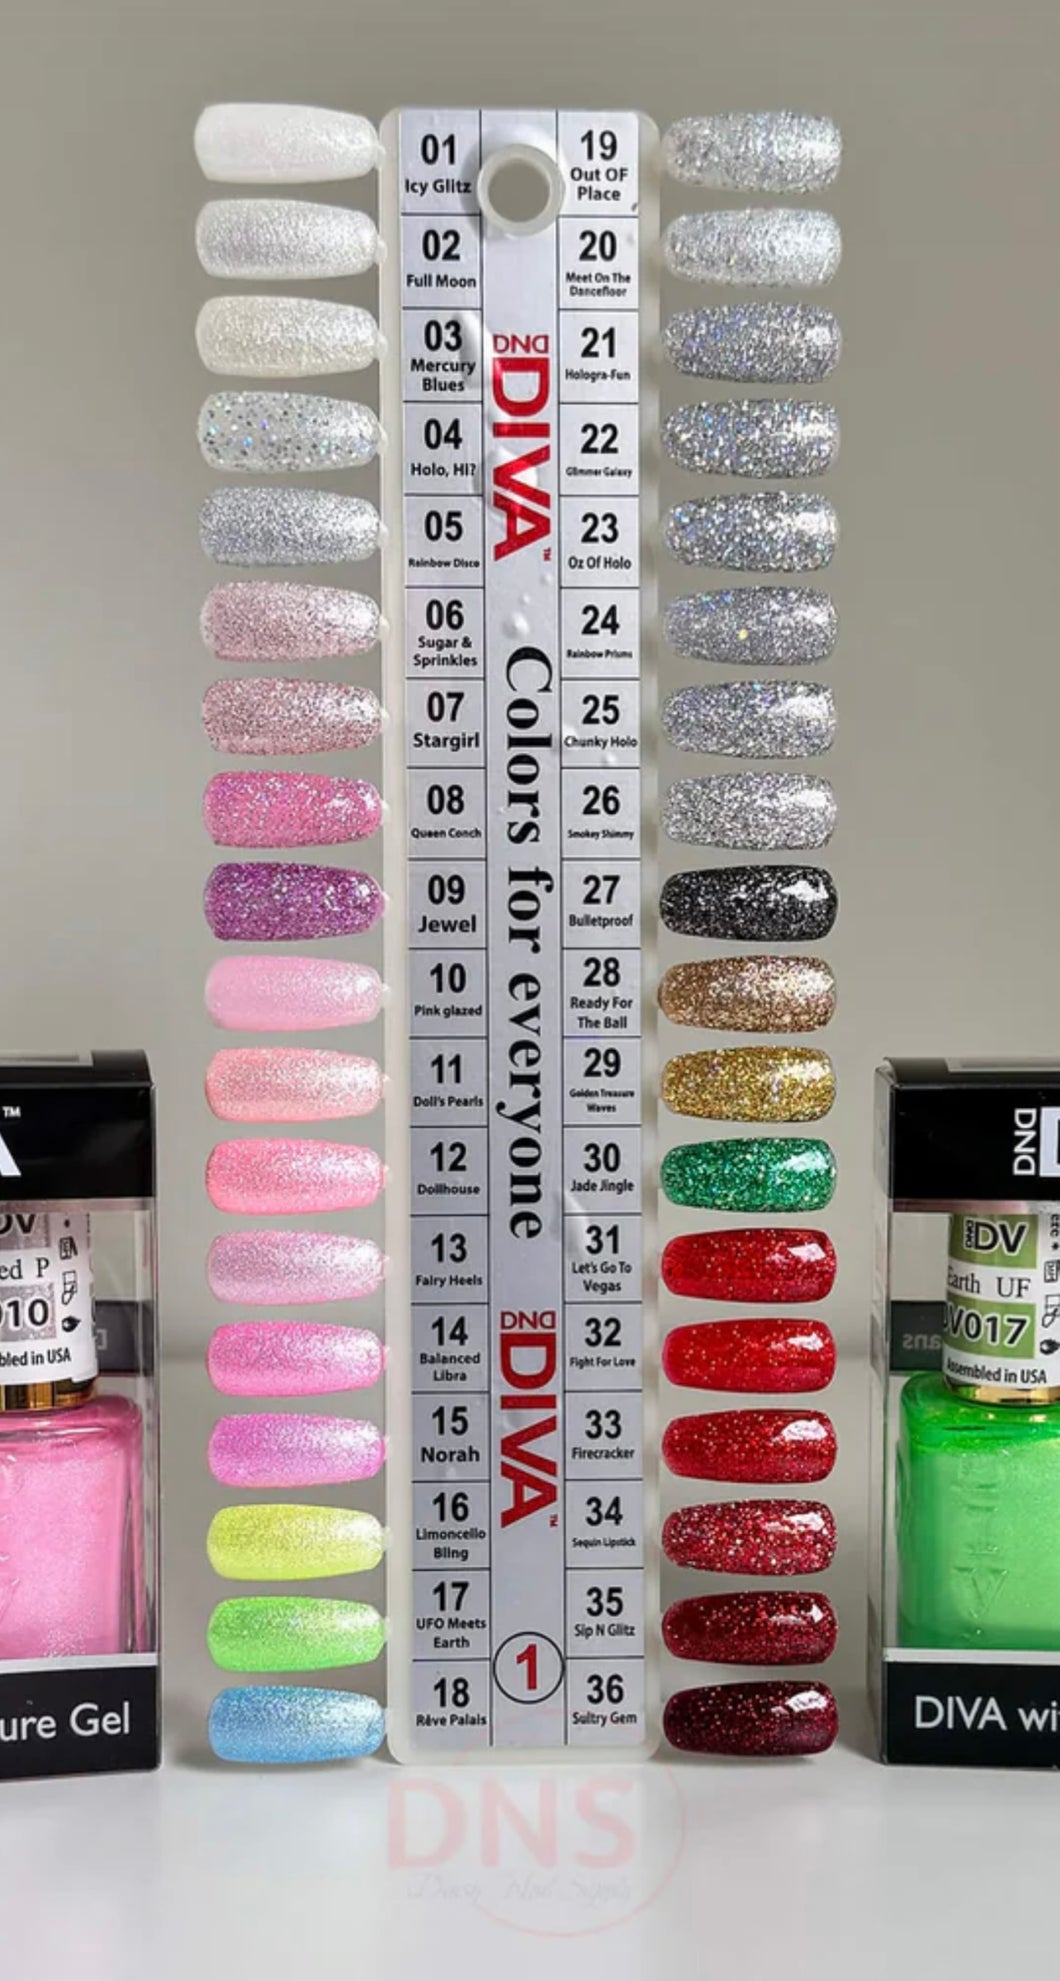 DND DIVA Nail Gel Collection #1